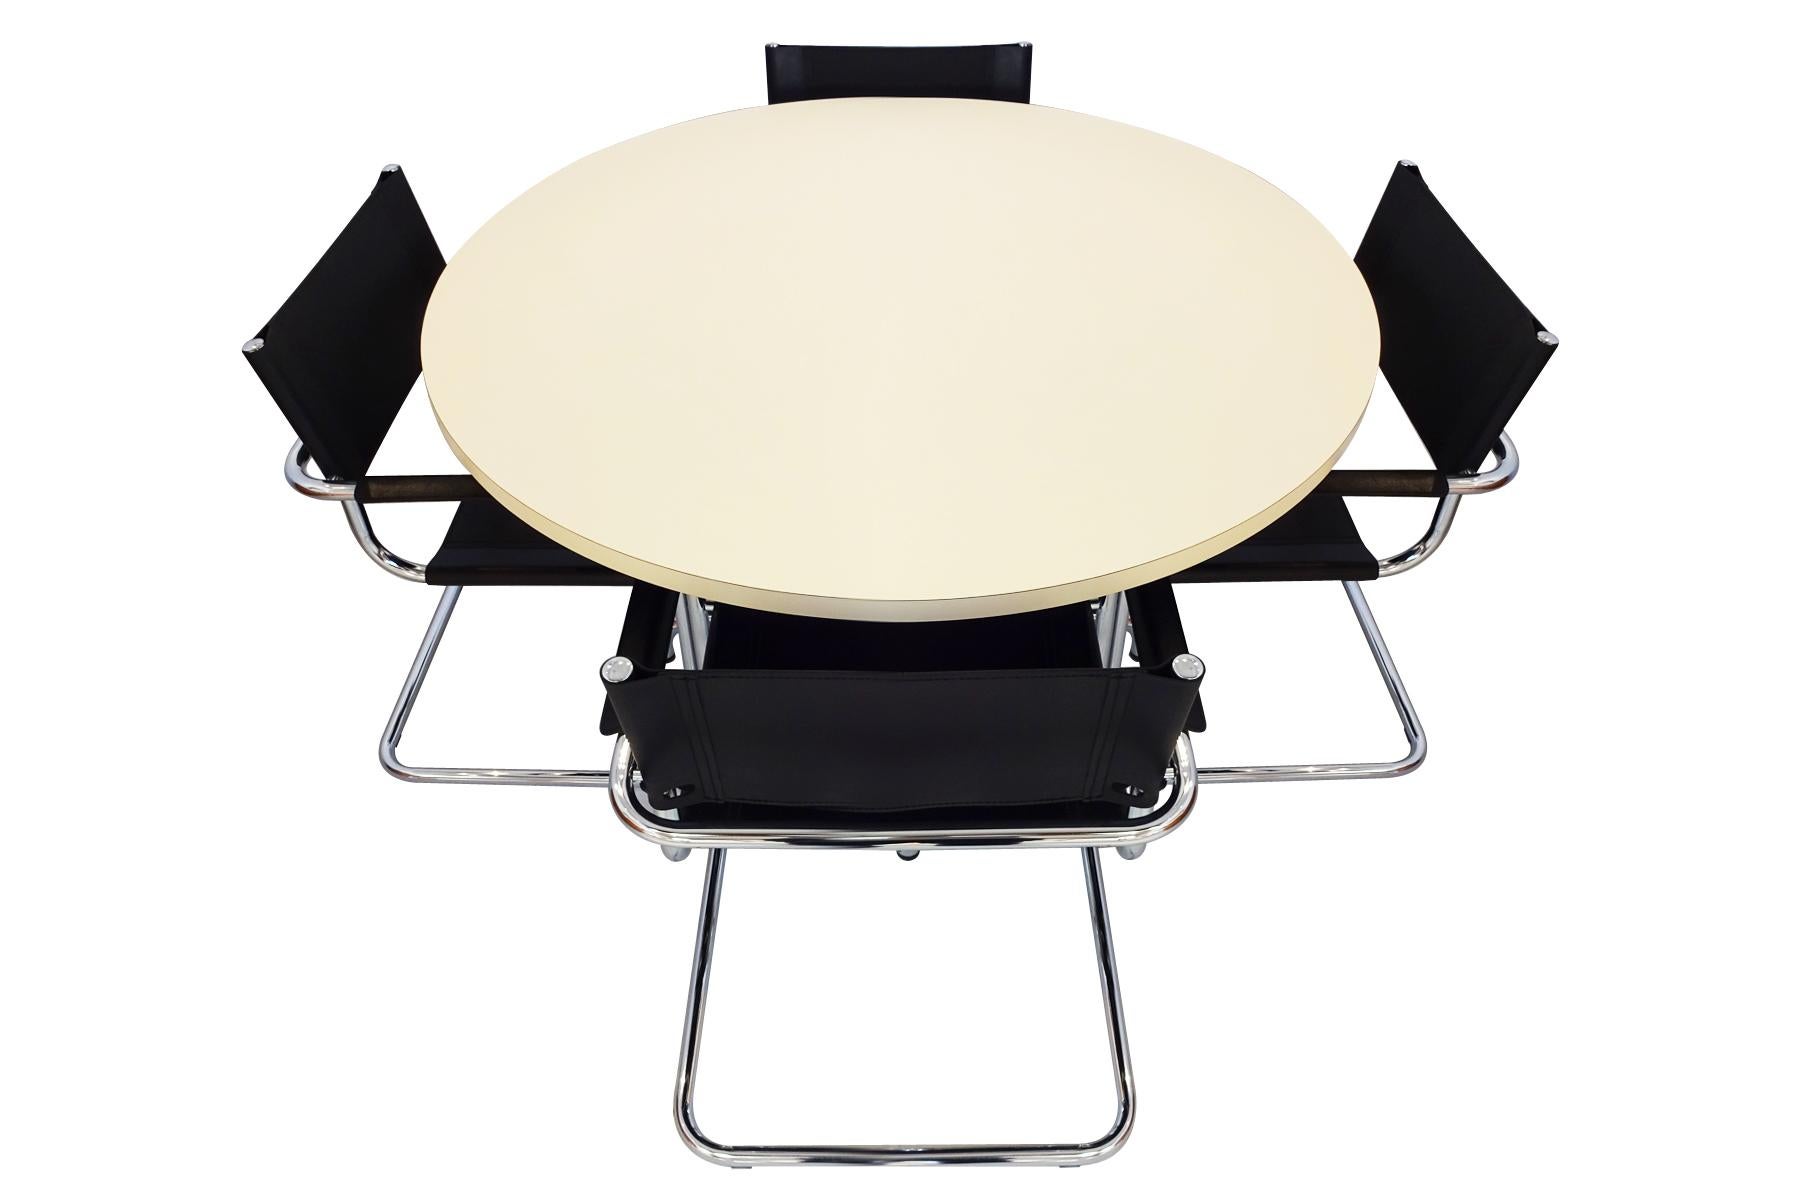 Bauhaus dining set featuring 4 Mart Stam cantilever chairs in black leather and chrome and an original Thonet cream melamine topped and chrome table – circa 1960s.

This is an excellent modernist dining set that has a sophisticated appeal created by